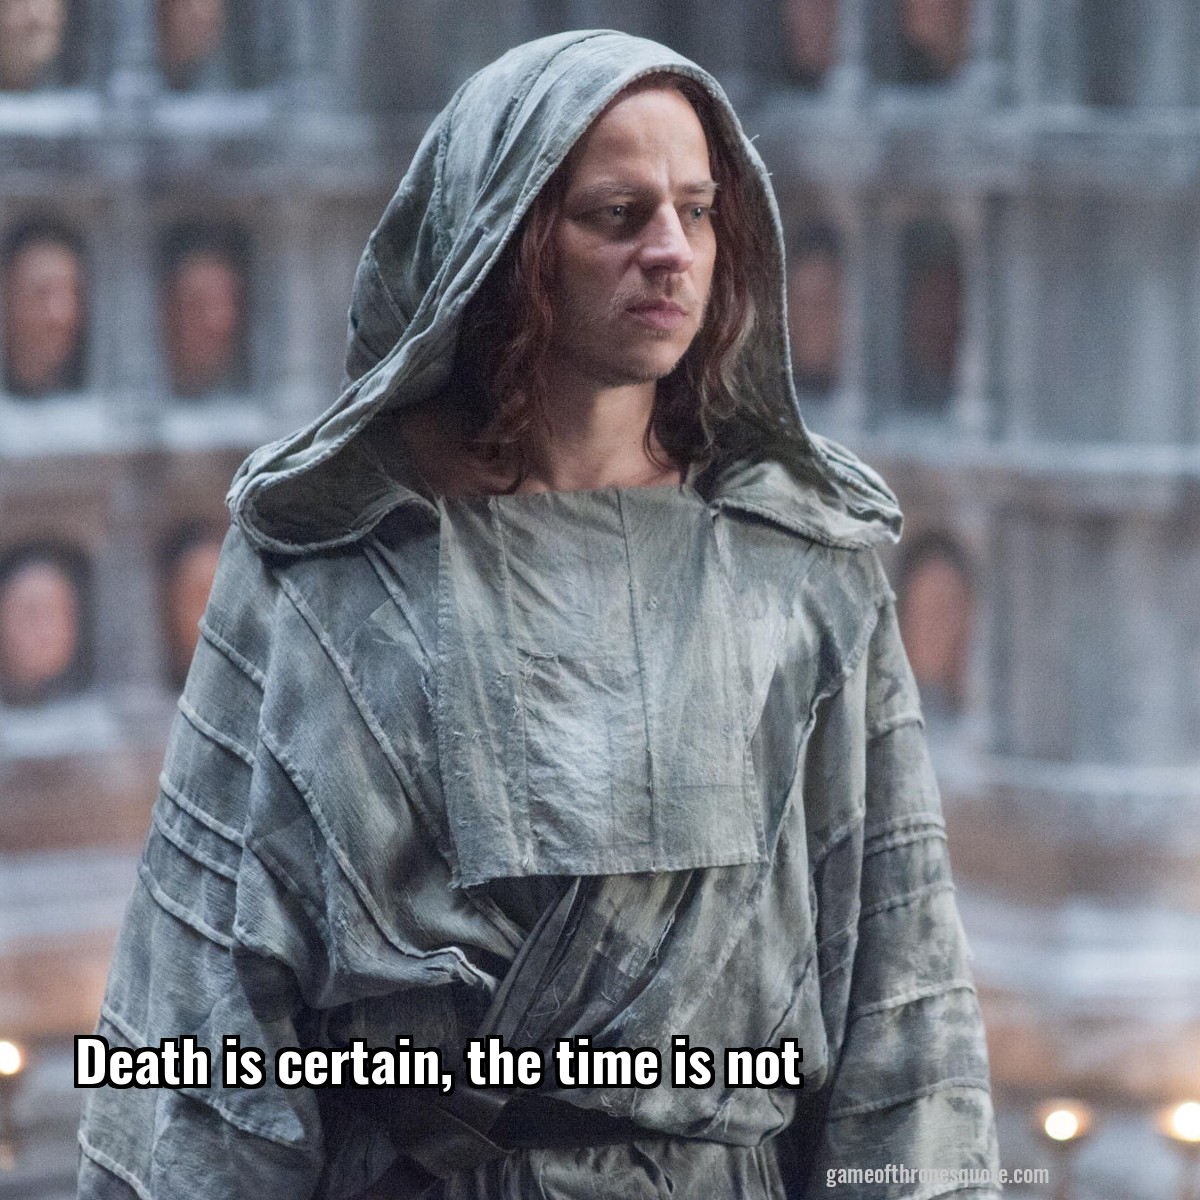 Death is certain, the time is not